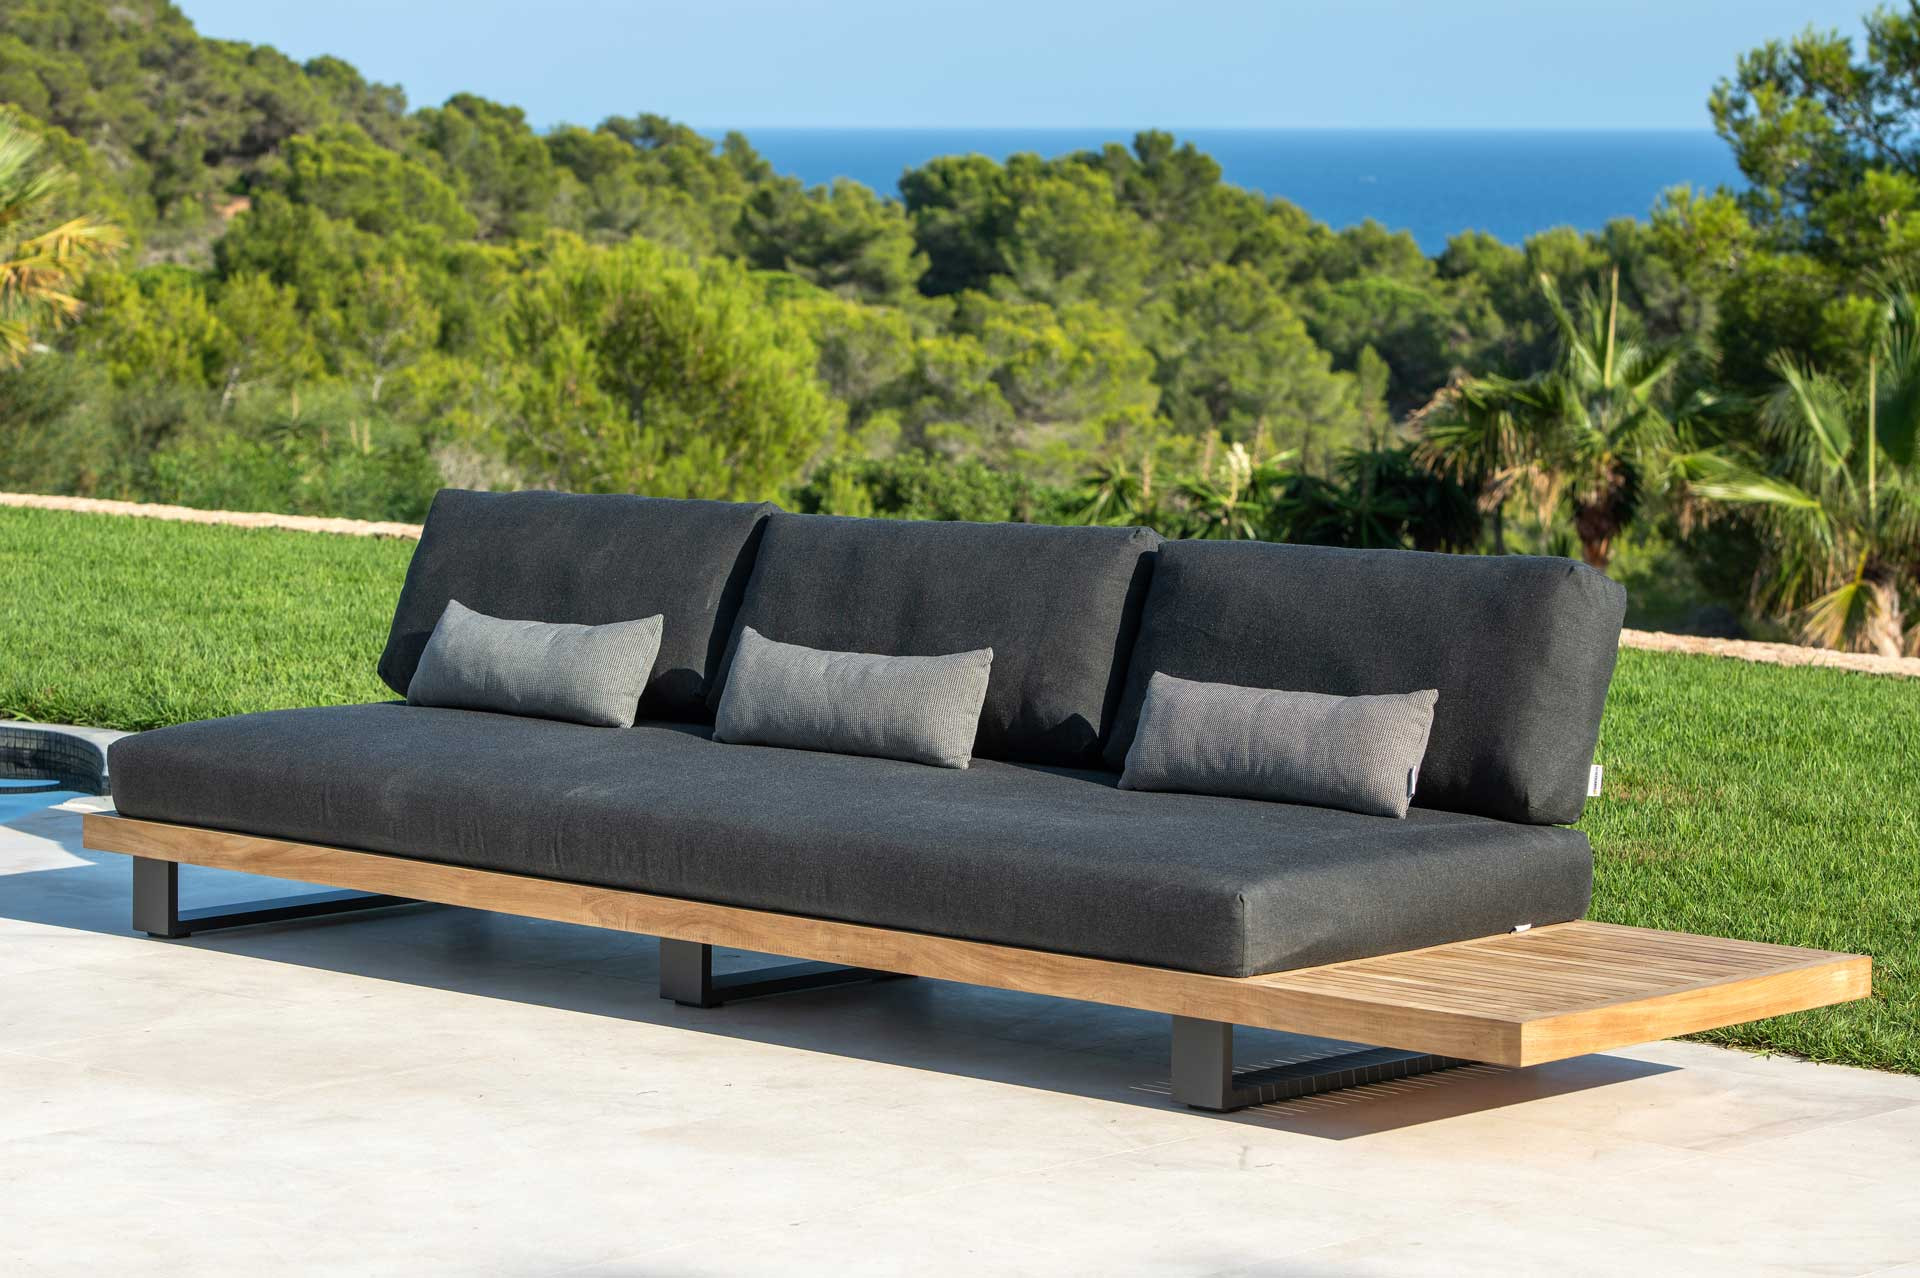 Truro living bench 3-seater